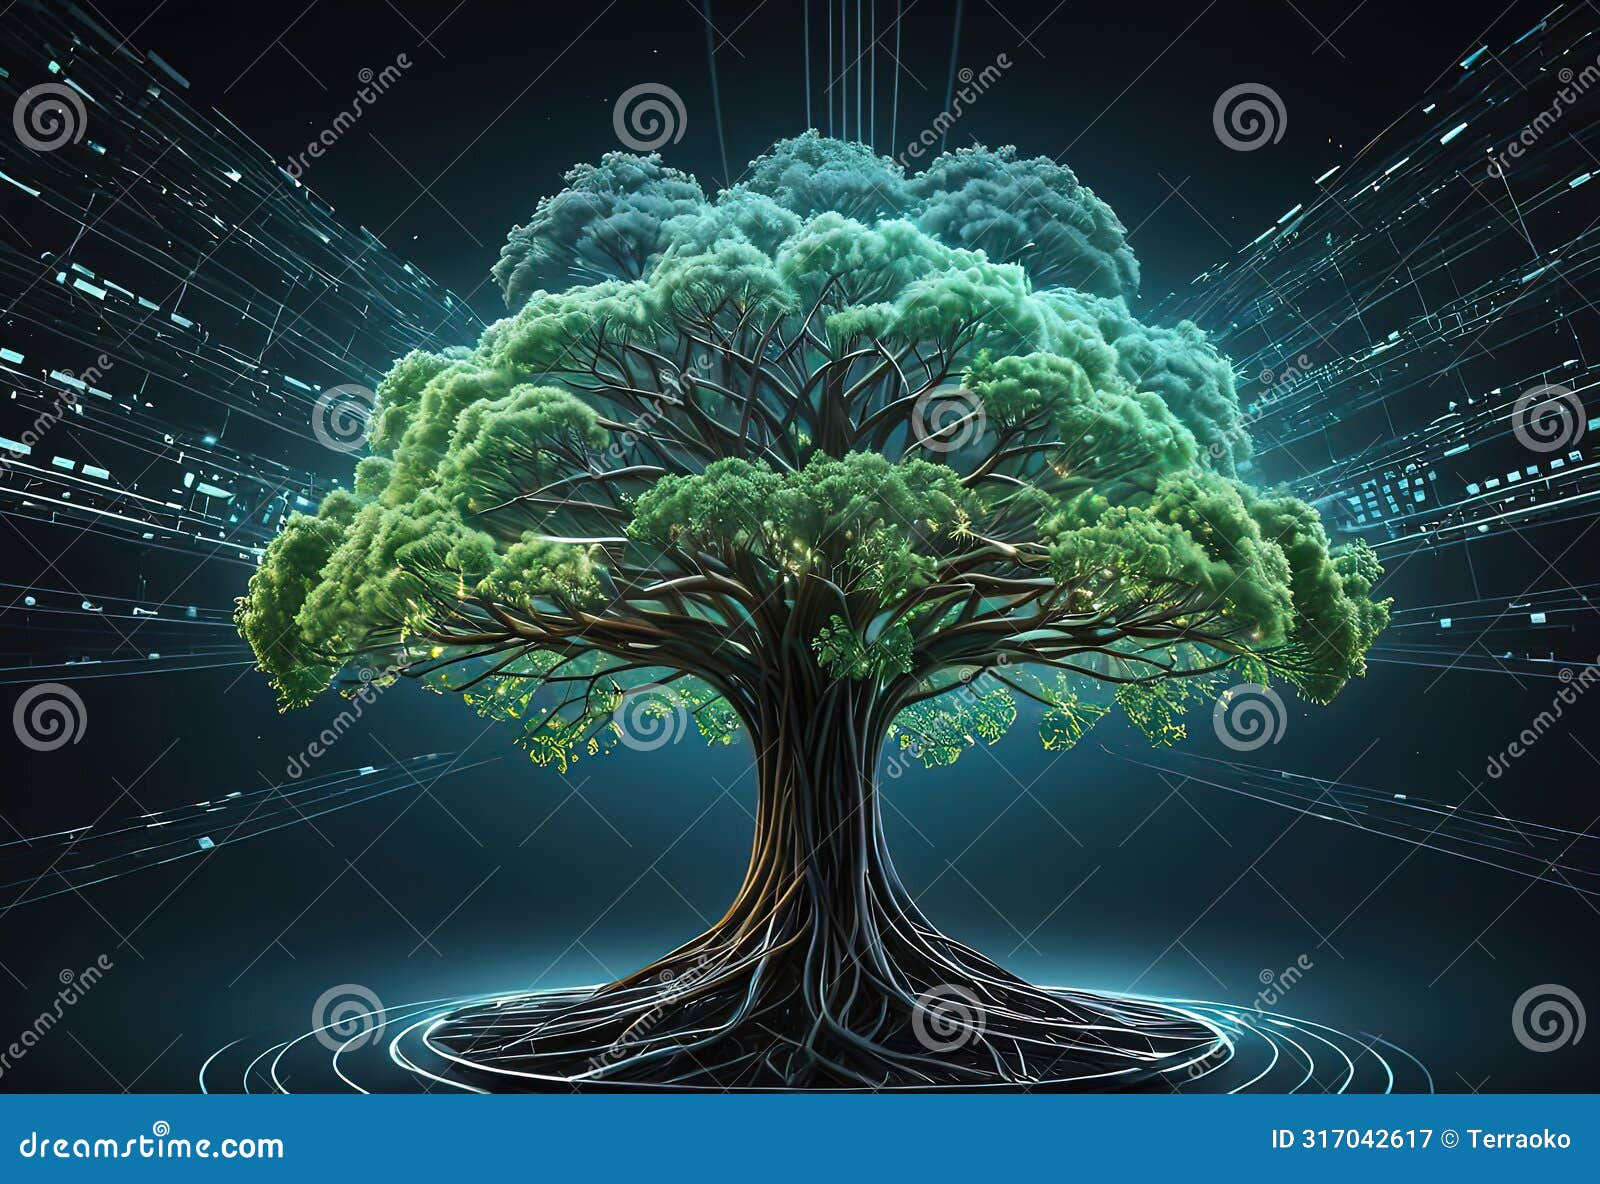  of a tree with branches seamlessly integrated into a complex cyber data network